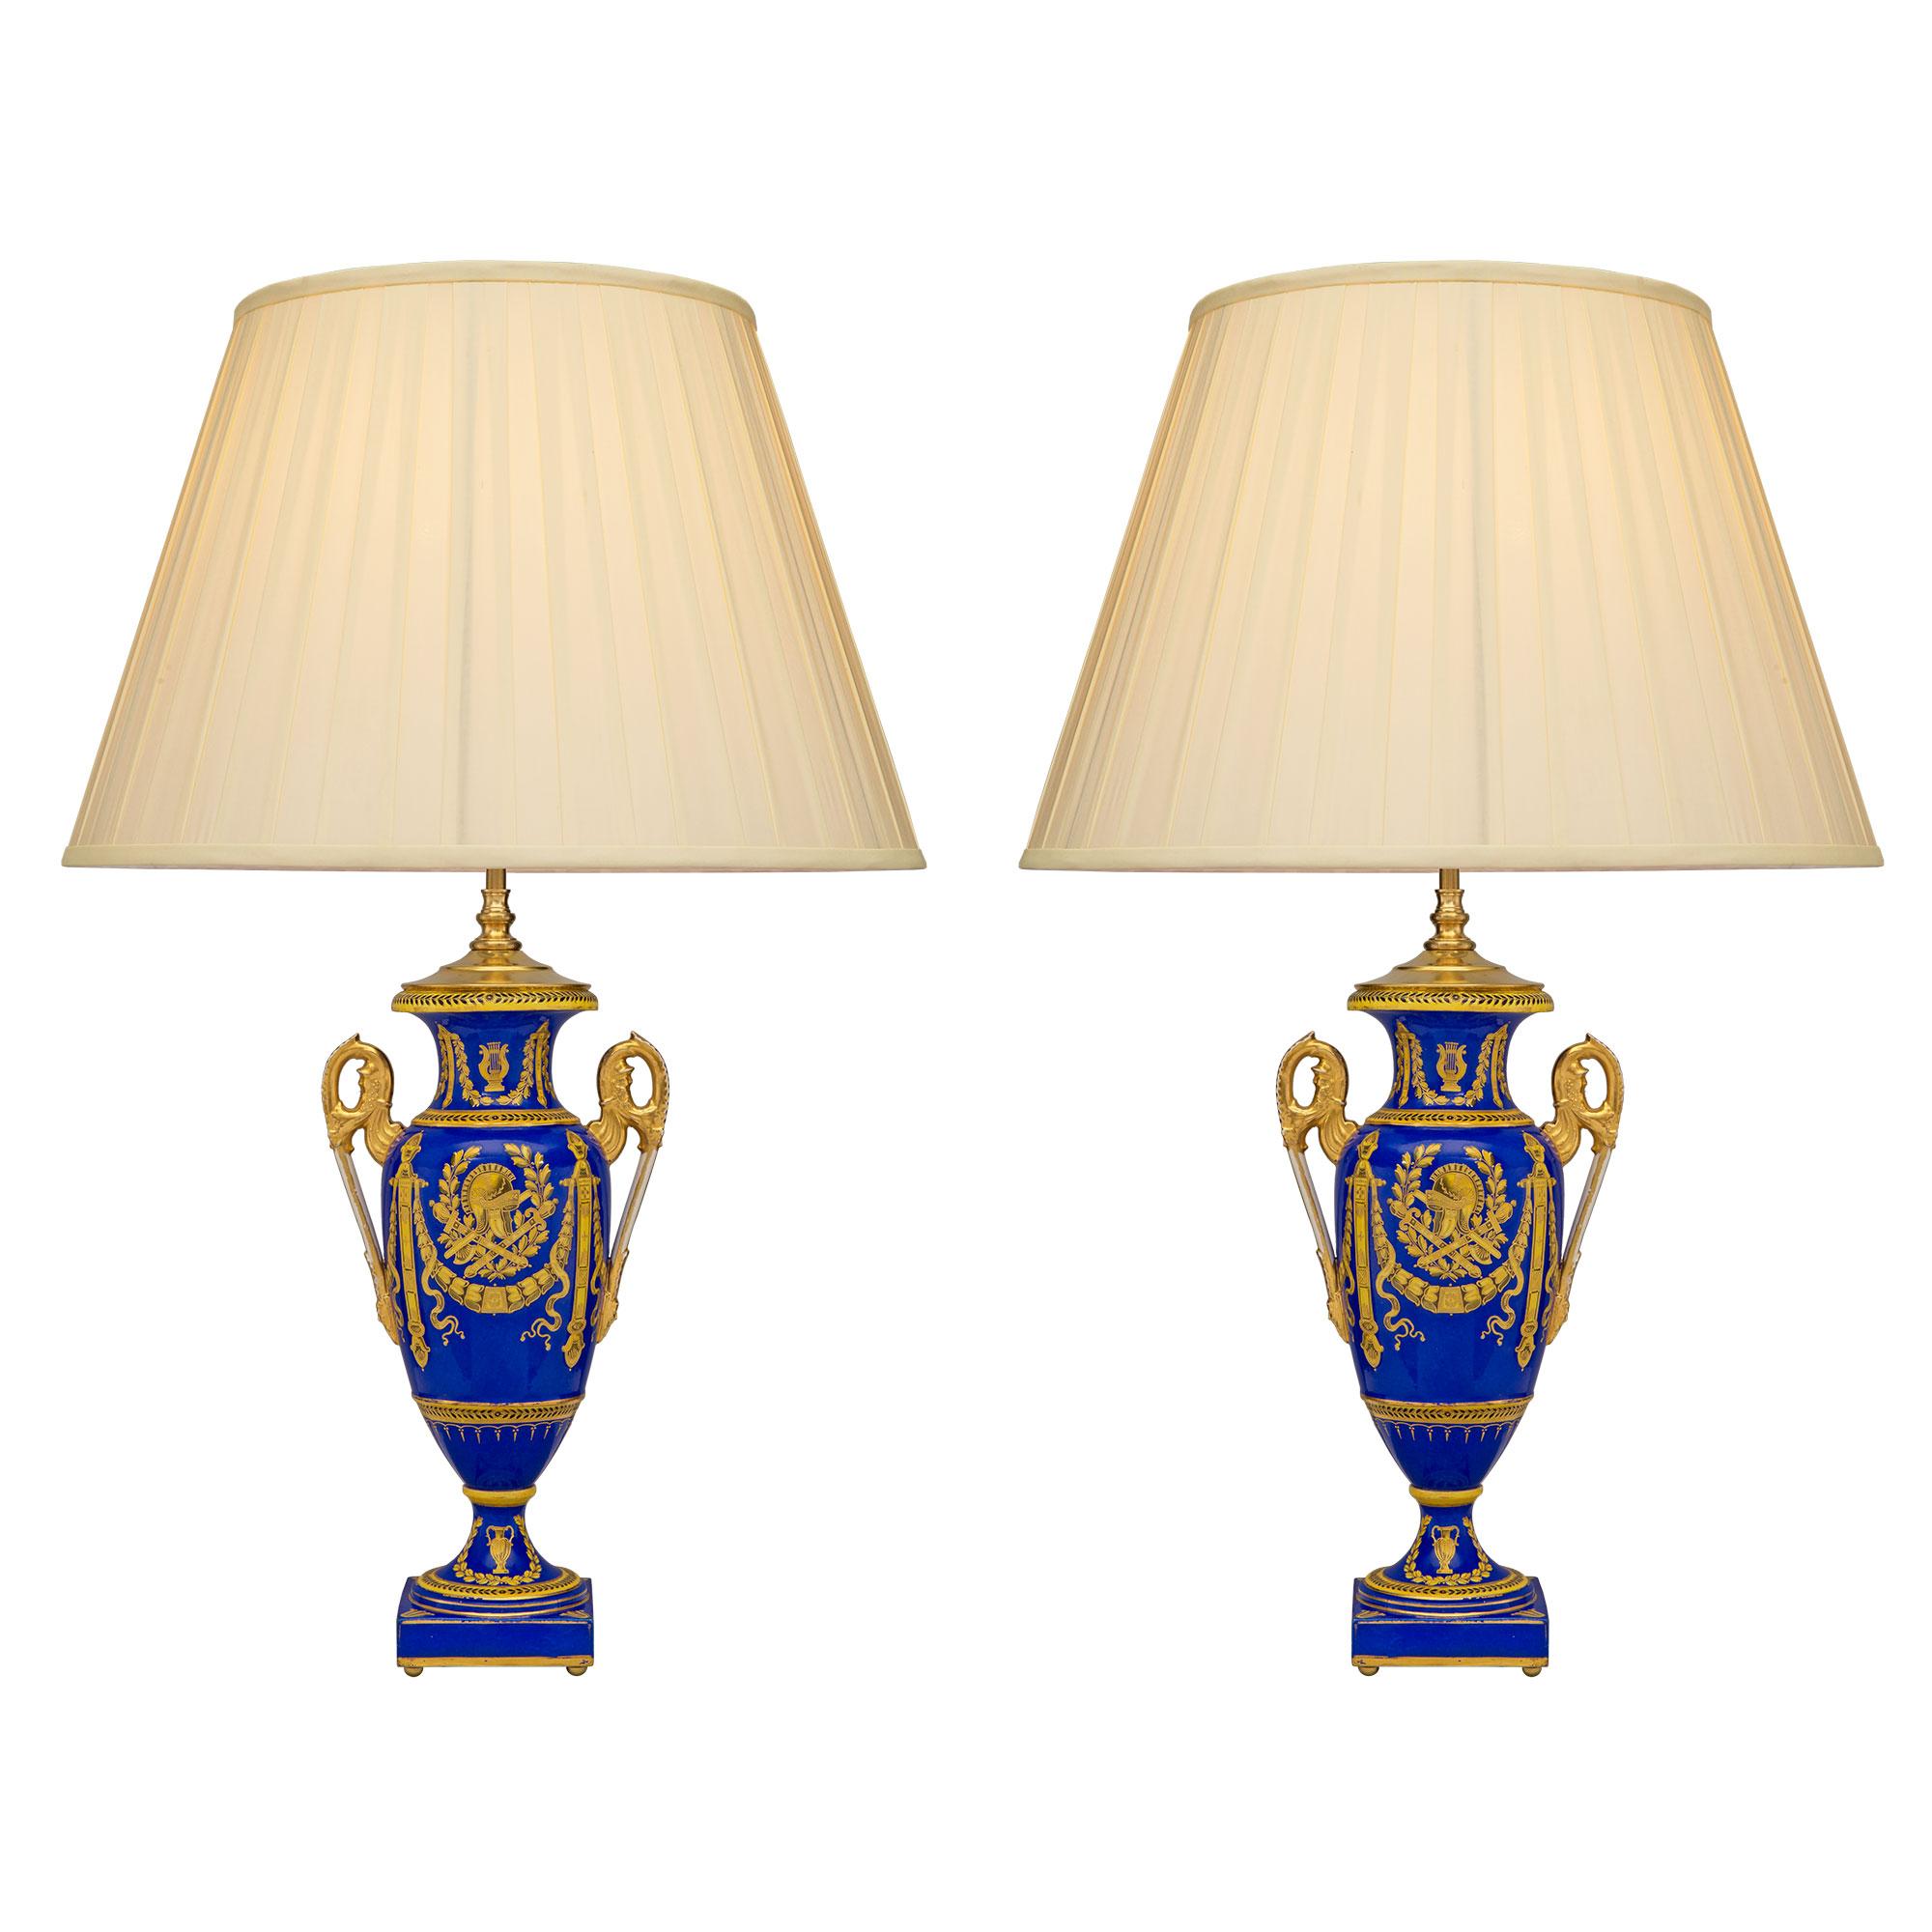 Pair of French 19th Century Neoclassical Style Porcelain Lamps